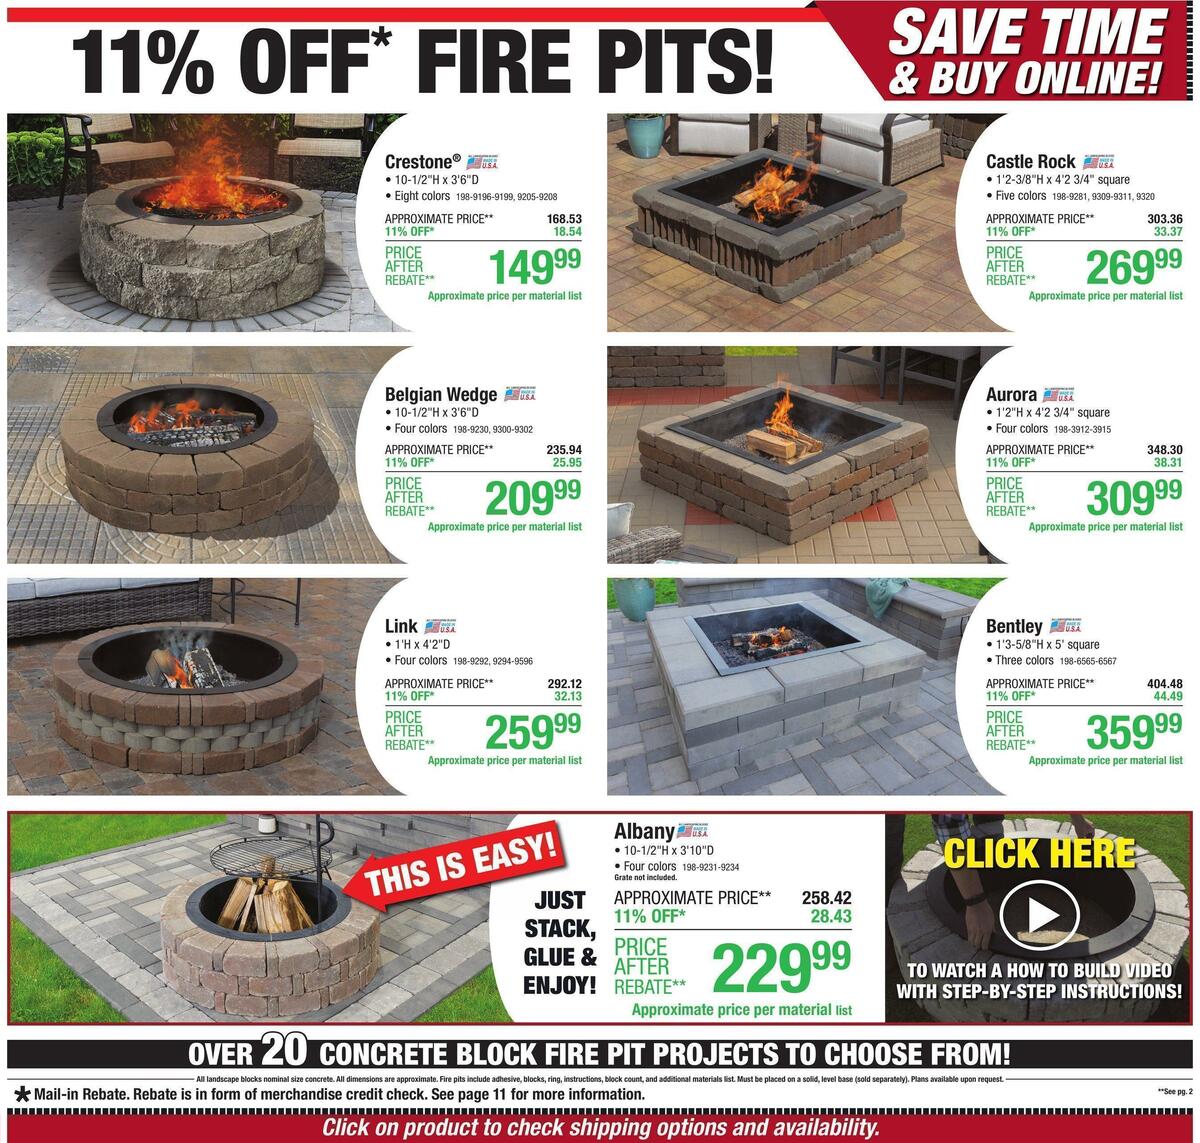 Menards Weekly Ad from March 9